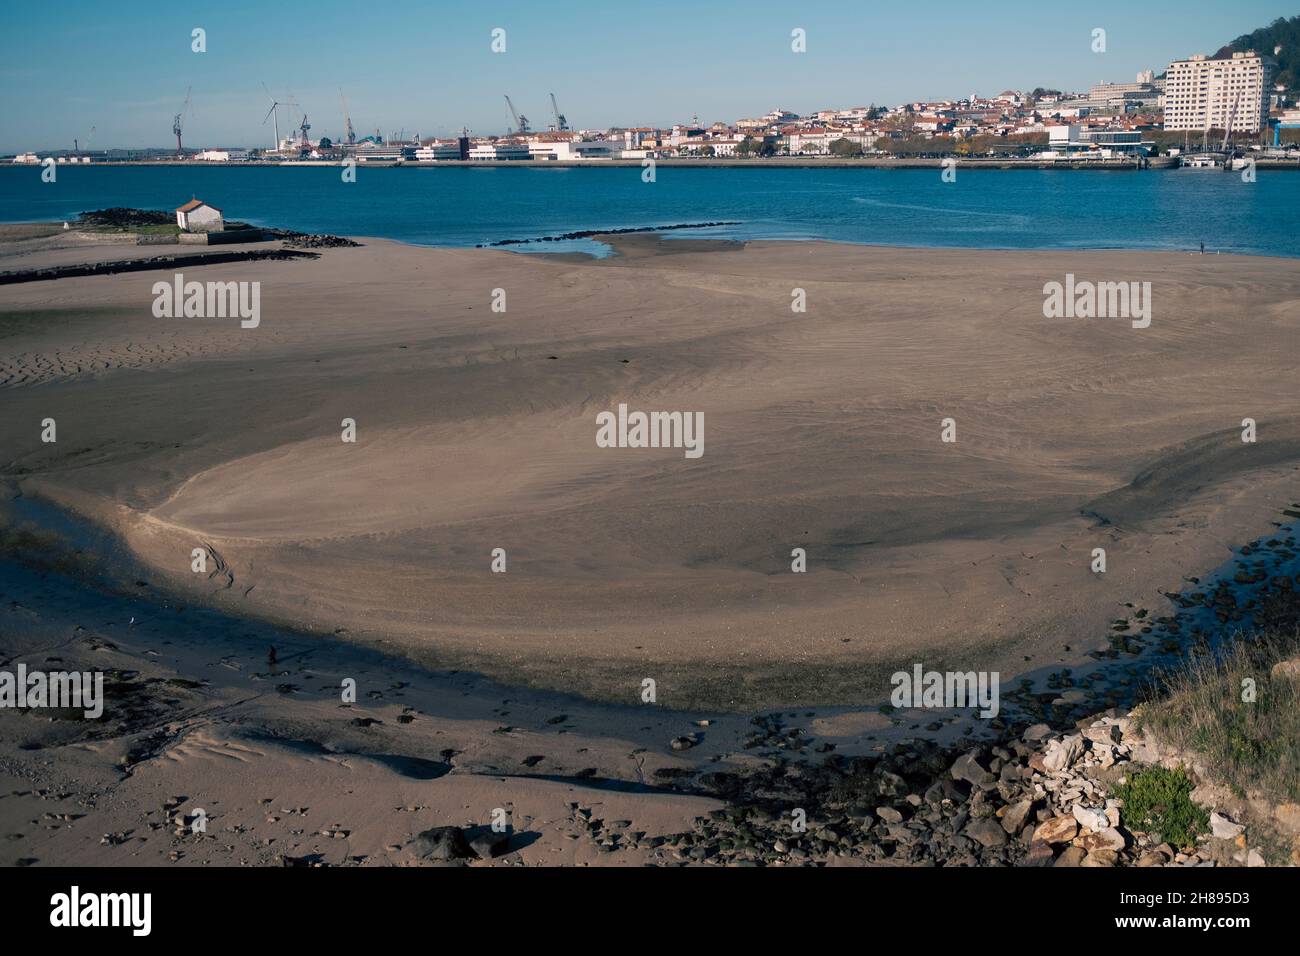 View of the Lima river in Viana do Castelo, Portugal. Stock Photo